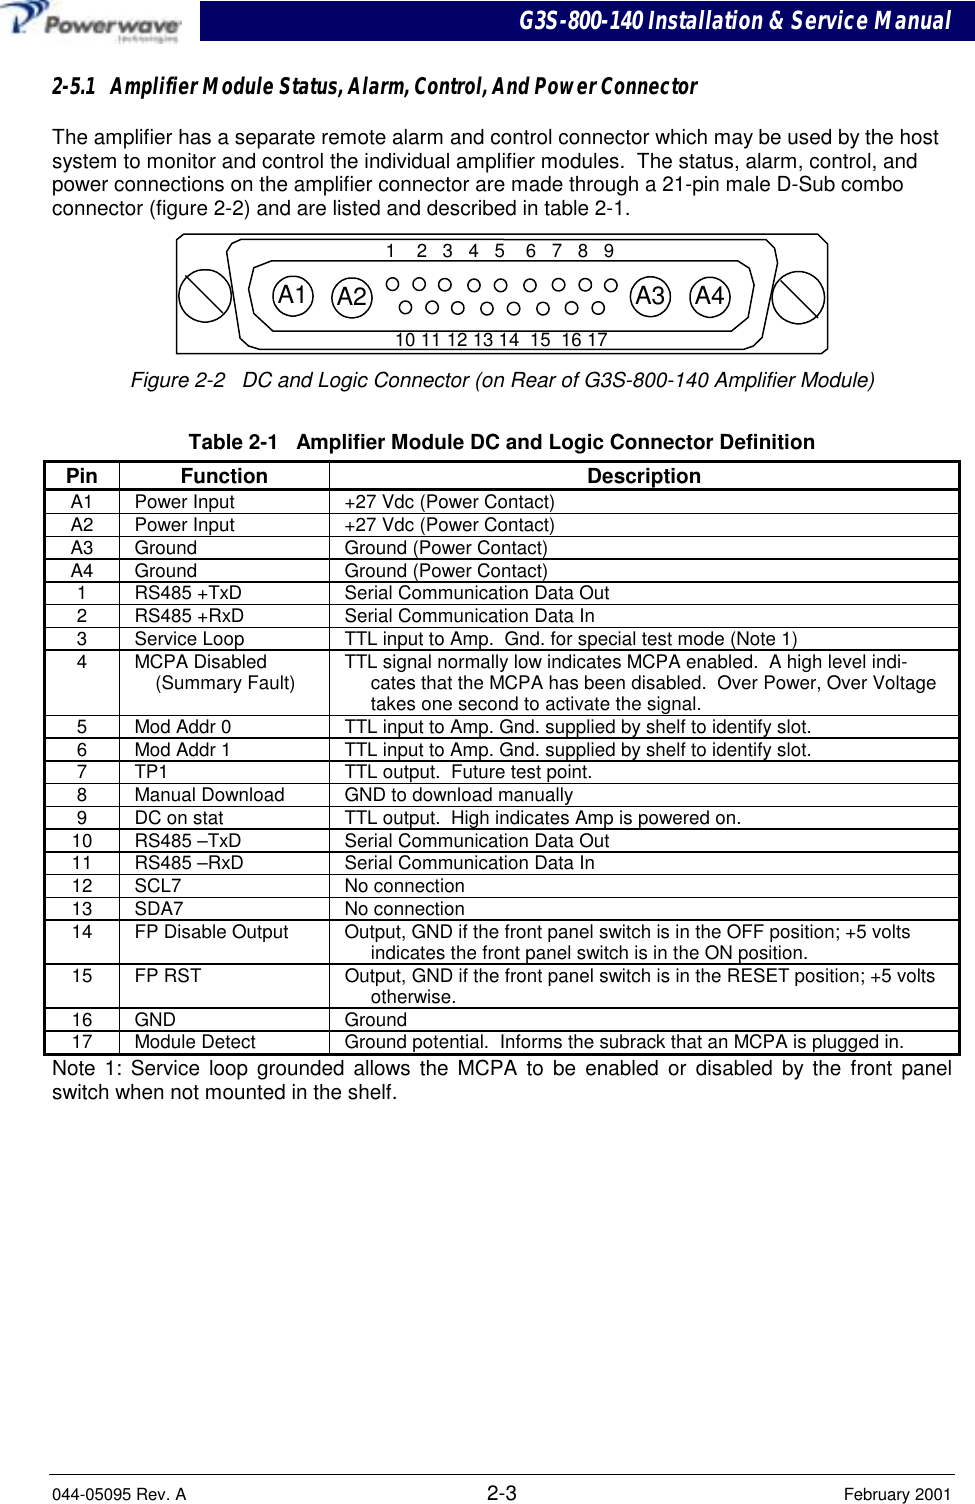 G3S-800-140 Installation &amp; Service Manual044-05095 Rev. A 2-3 February 20012-5.1   Amplifier Module Status, Alarm, Control, And Power ConnectorThe amplifier has a separate remote alarm and control connector which may be used by the hostsystem to monitor and control the individual amplifier modules.  The status, alarm, control, andpower connections on the amplifier connector are made through a 21-pin male D-Sub comboconnector (figure 2-2) and are listed and described in table 2-1.A1 A2 A3 A41    2   3   4   5    6   7   8   910 11 12 13 14  15  16 17Figure 2-2   DC and Logic Connector (on Rear of G3S-800-140 Amplifier Module)Table 2-1   Amplifier Module DC and Logic Connector DefinitionPin Function DescriptionA1 Power Input +27 Vdc (Power Contact)A2 Power Input +27 Vdc (Power Contact)A3 Ground Ground (Power Contact)A4 Ground Ground (Power Contact)1 RS485 +TxD Serial Communication Data Out2 RS485 +RxD Serial Communication Data In3 Service Loop TTL input to Amp.  Gnd. for special test mode (Note 1)4 MCPA Disabled(Summary Fault) TTL signal normally low indicates MCPA enabled.  A high level indi-cates that the MCPA has been disabled.  Over Power, Over Voltagetakes one second to activate the signal.5 Mod Addr 0 TTL input to Amp. Gnd. supplied by shelf to identify slot.6 Mod Addr 1 TTL input to Amp. Gnd. supplied by shelf to identify slot.7 TP1 TTL output.  Future test point.8 Manual Download GND to download manually9 DC on stat TTL output.  High indicates Amp is powered on.10 RS485 –TxD Serial Communication Data Out11 RS485 –RxD Serial Communication Data In12 SCL7 No connection13 SDA7 No connection14 FP Disable Output Output, GND if the front panel switch is in the OFF position; +5 voltsindicates the front panel switch is in the ON position.15 FP RST Output, GND if the front panel switch is in the RESET position; +5 voltsotherwise.16 GND Ground17 Module Detect Ground potential.  Informs the subrack that an MCPA is plugged in.Note 1: Service loop grounded allows the MCPA to be enabled or disabled by the front panelswitch when not mounted in the shelf.